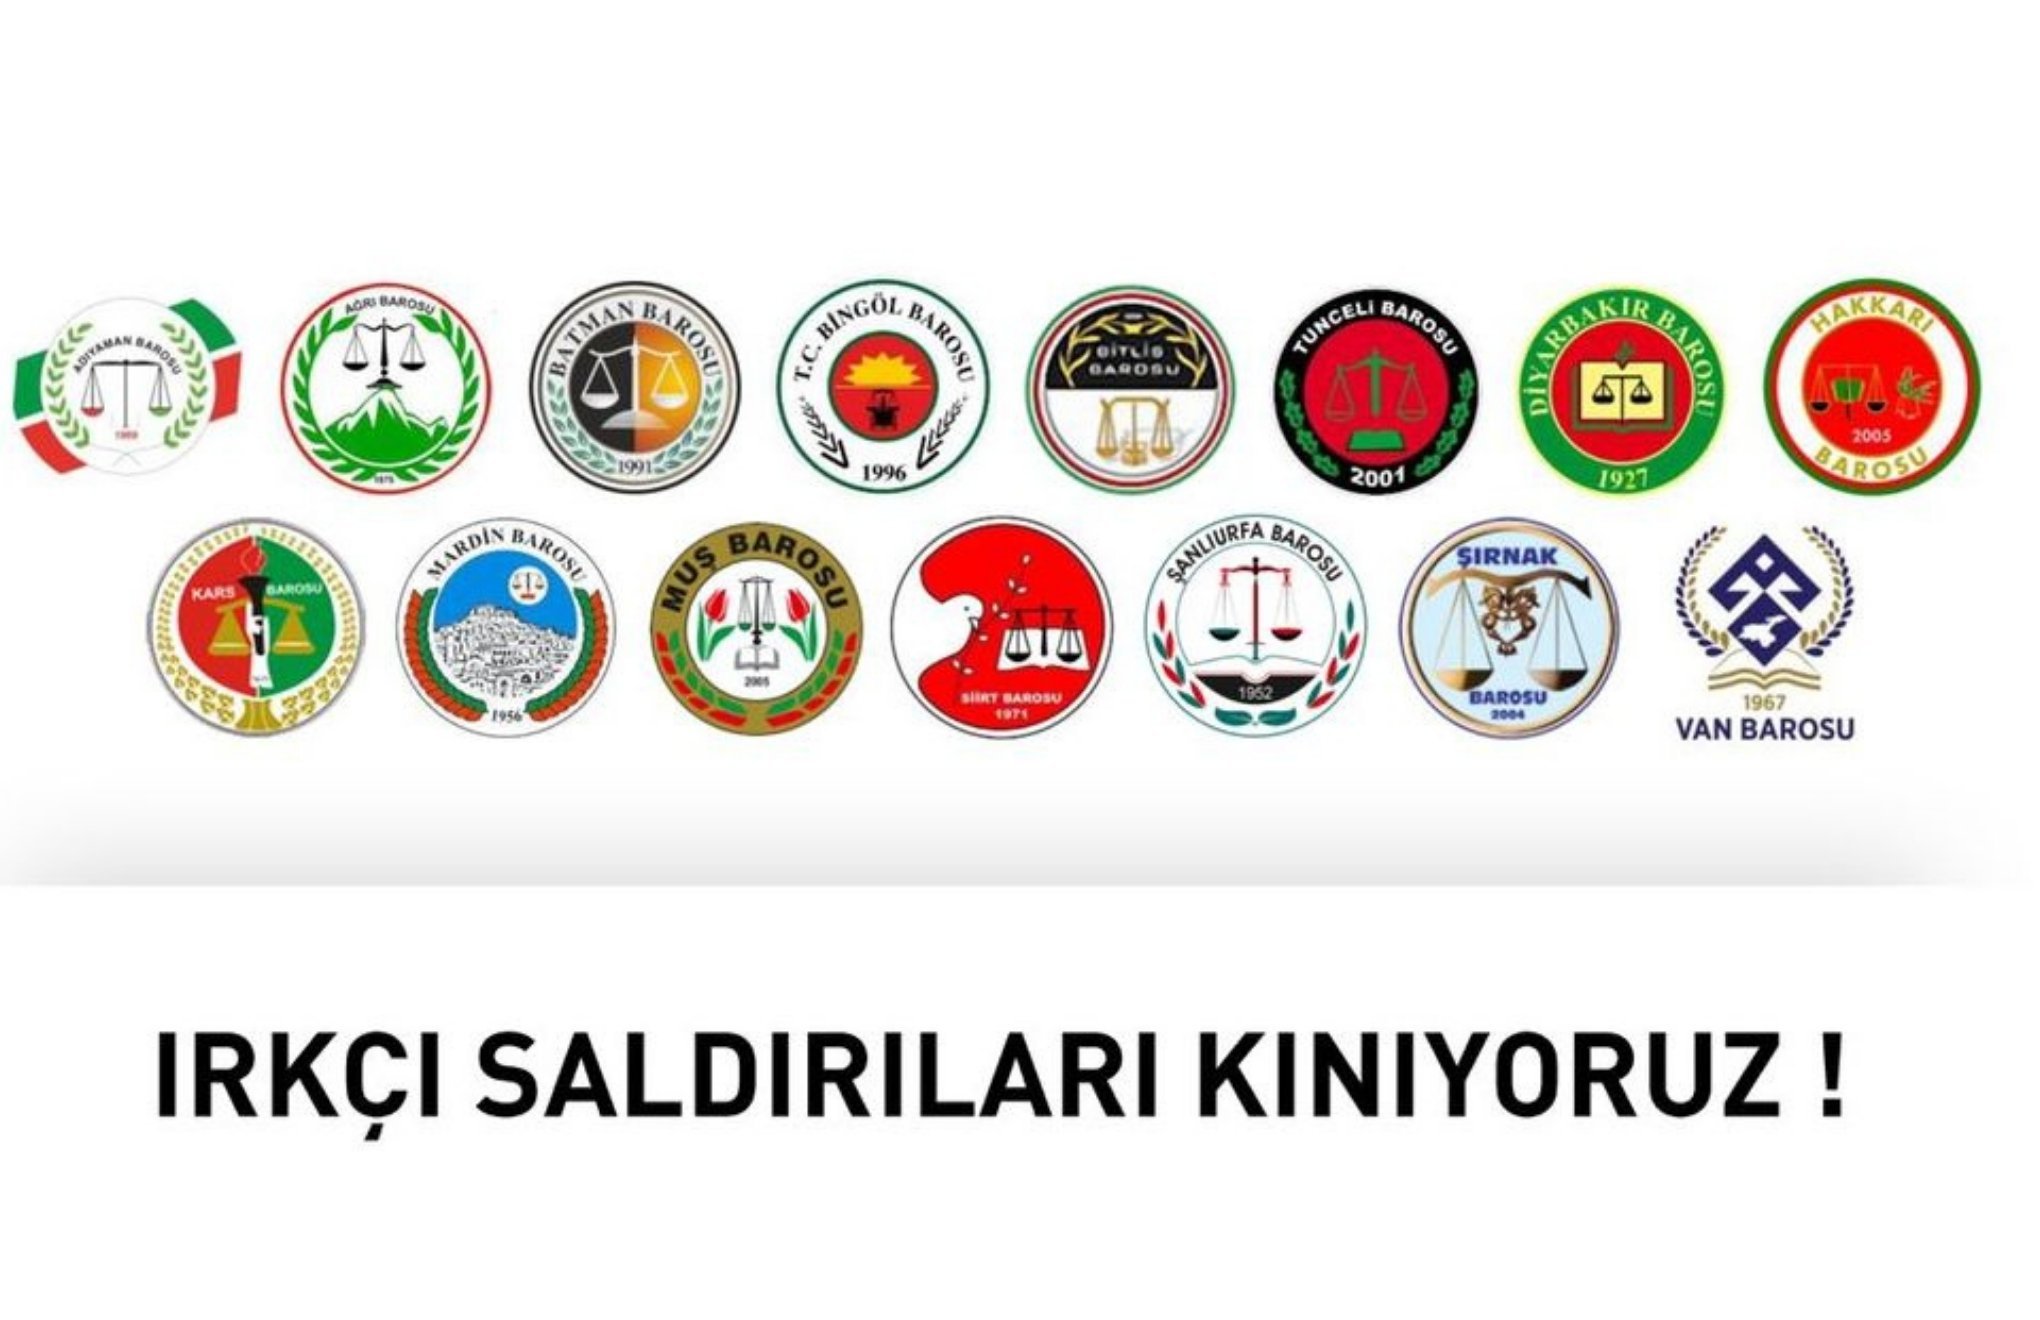 Diyarbakır Bar files a criminal complaint against pro-government daily